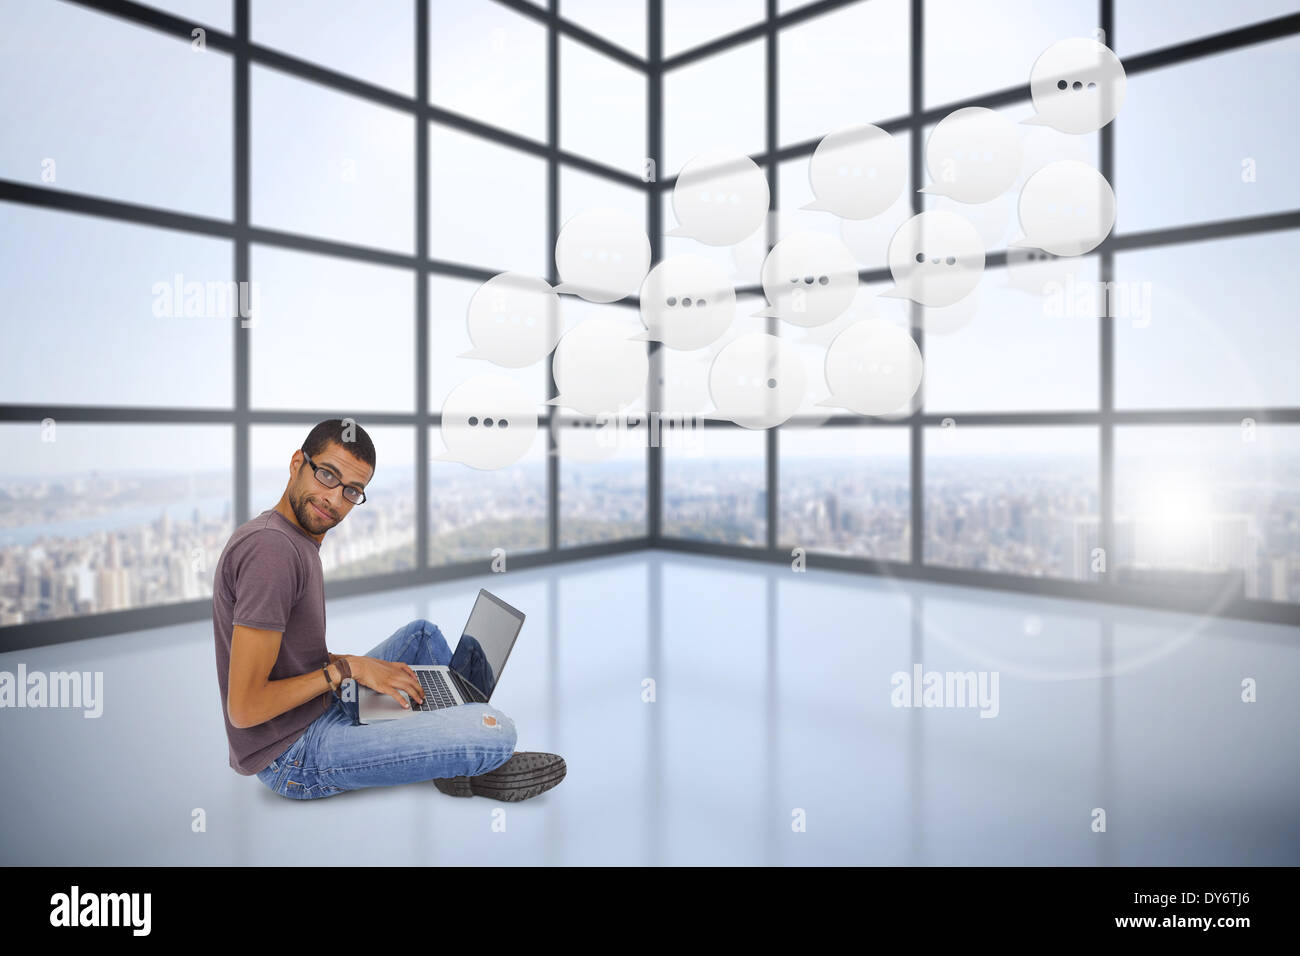 Composite image of man wearing glasses sitting on floor using laptop and looking at camera Stock Photo